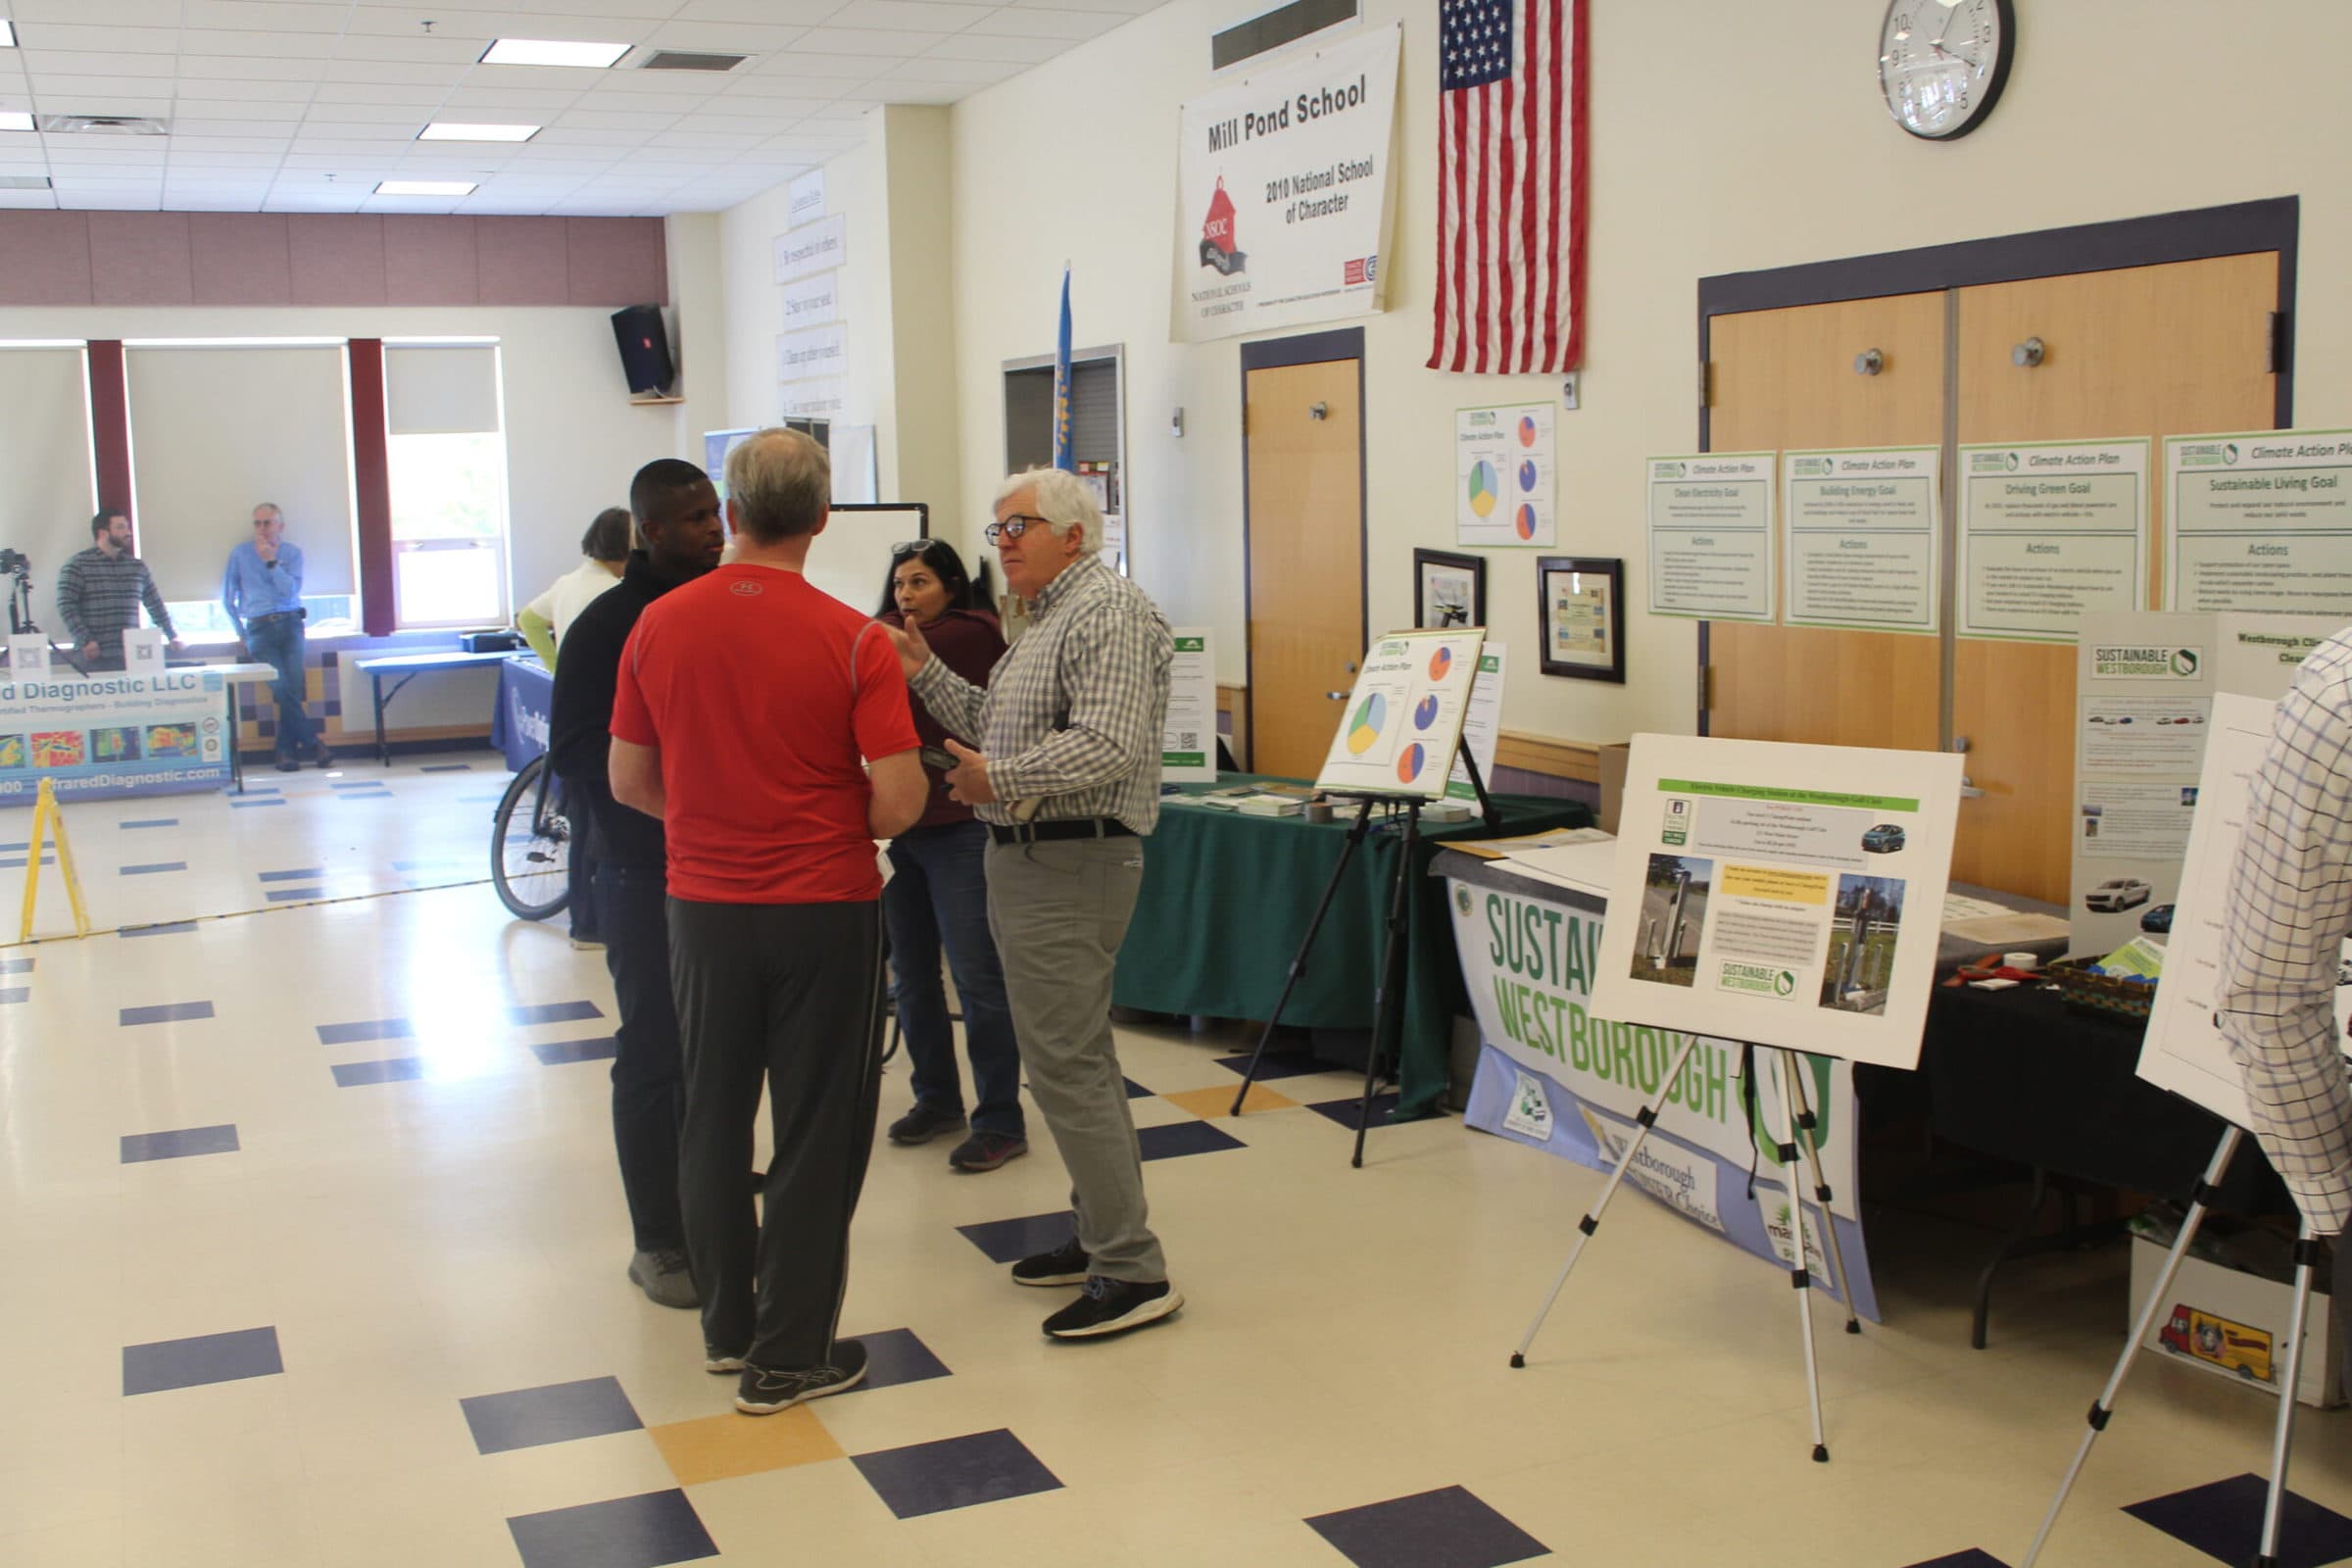 Learn about the environment at Westborough fair